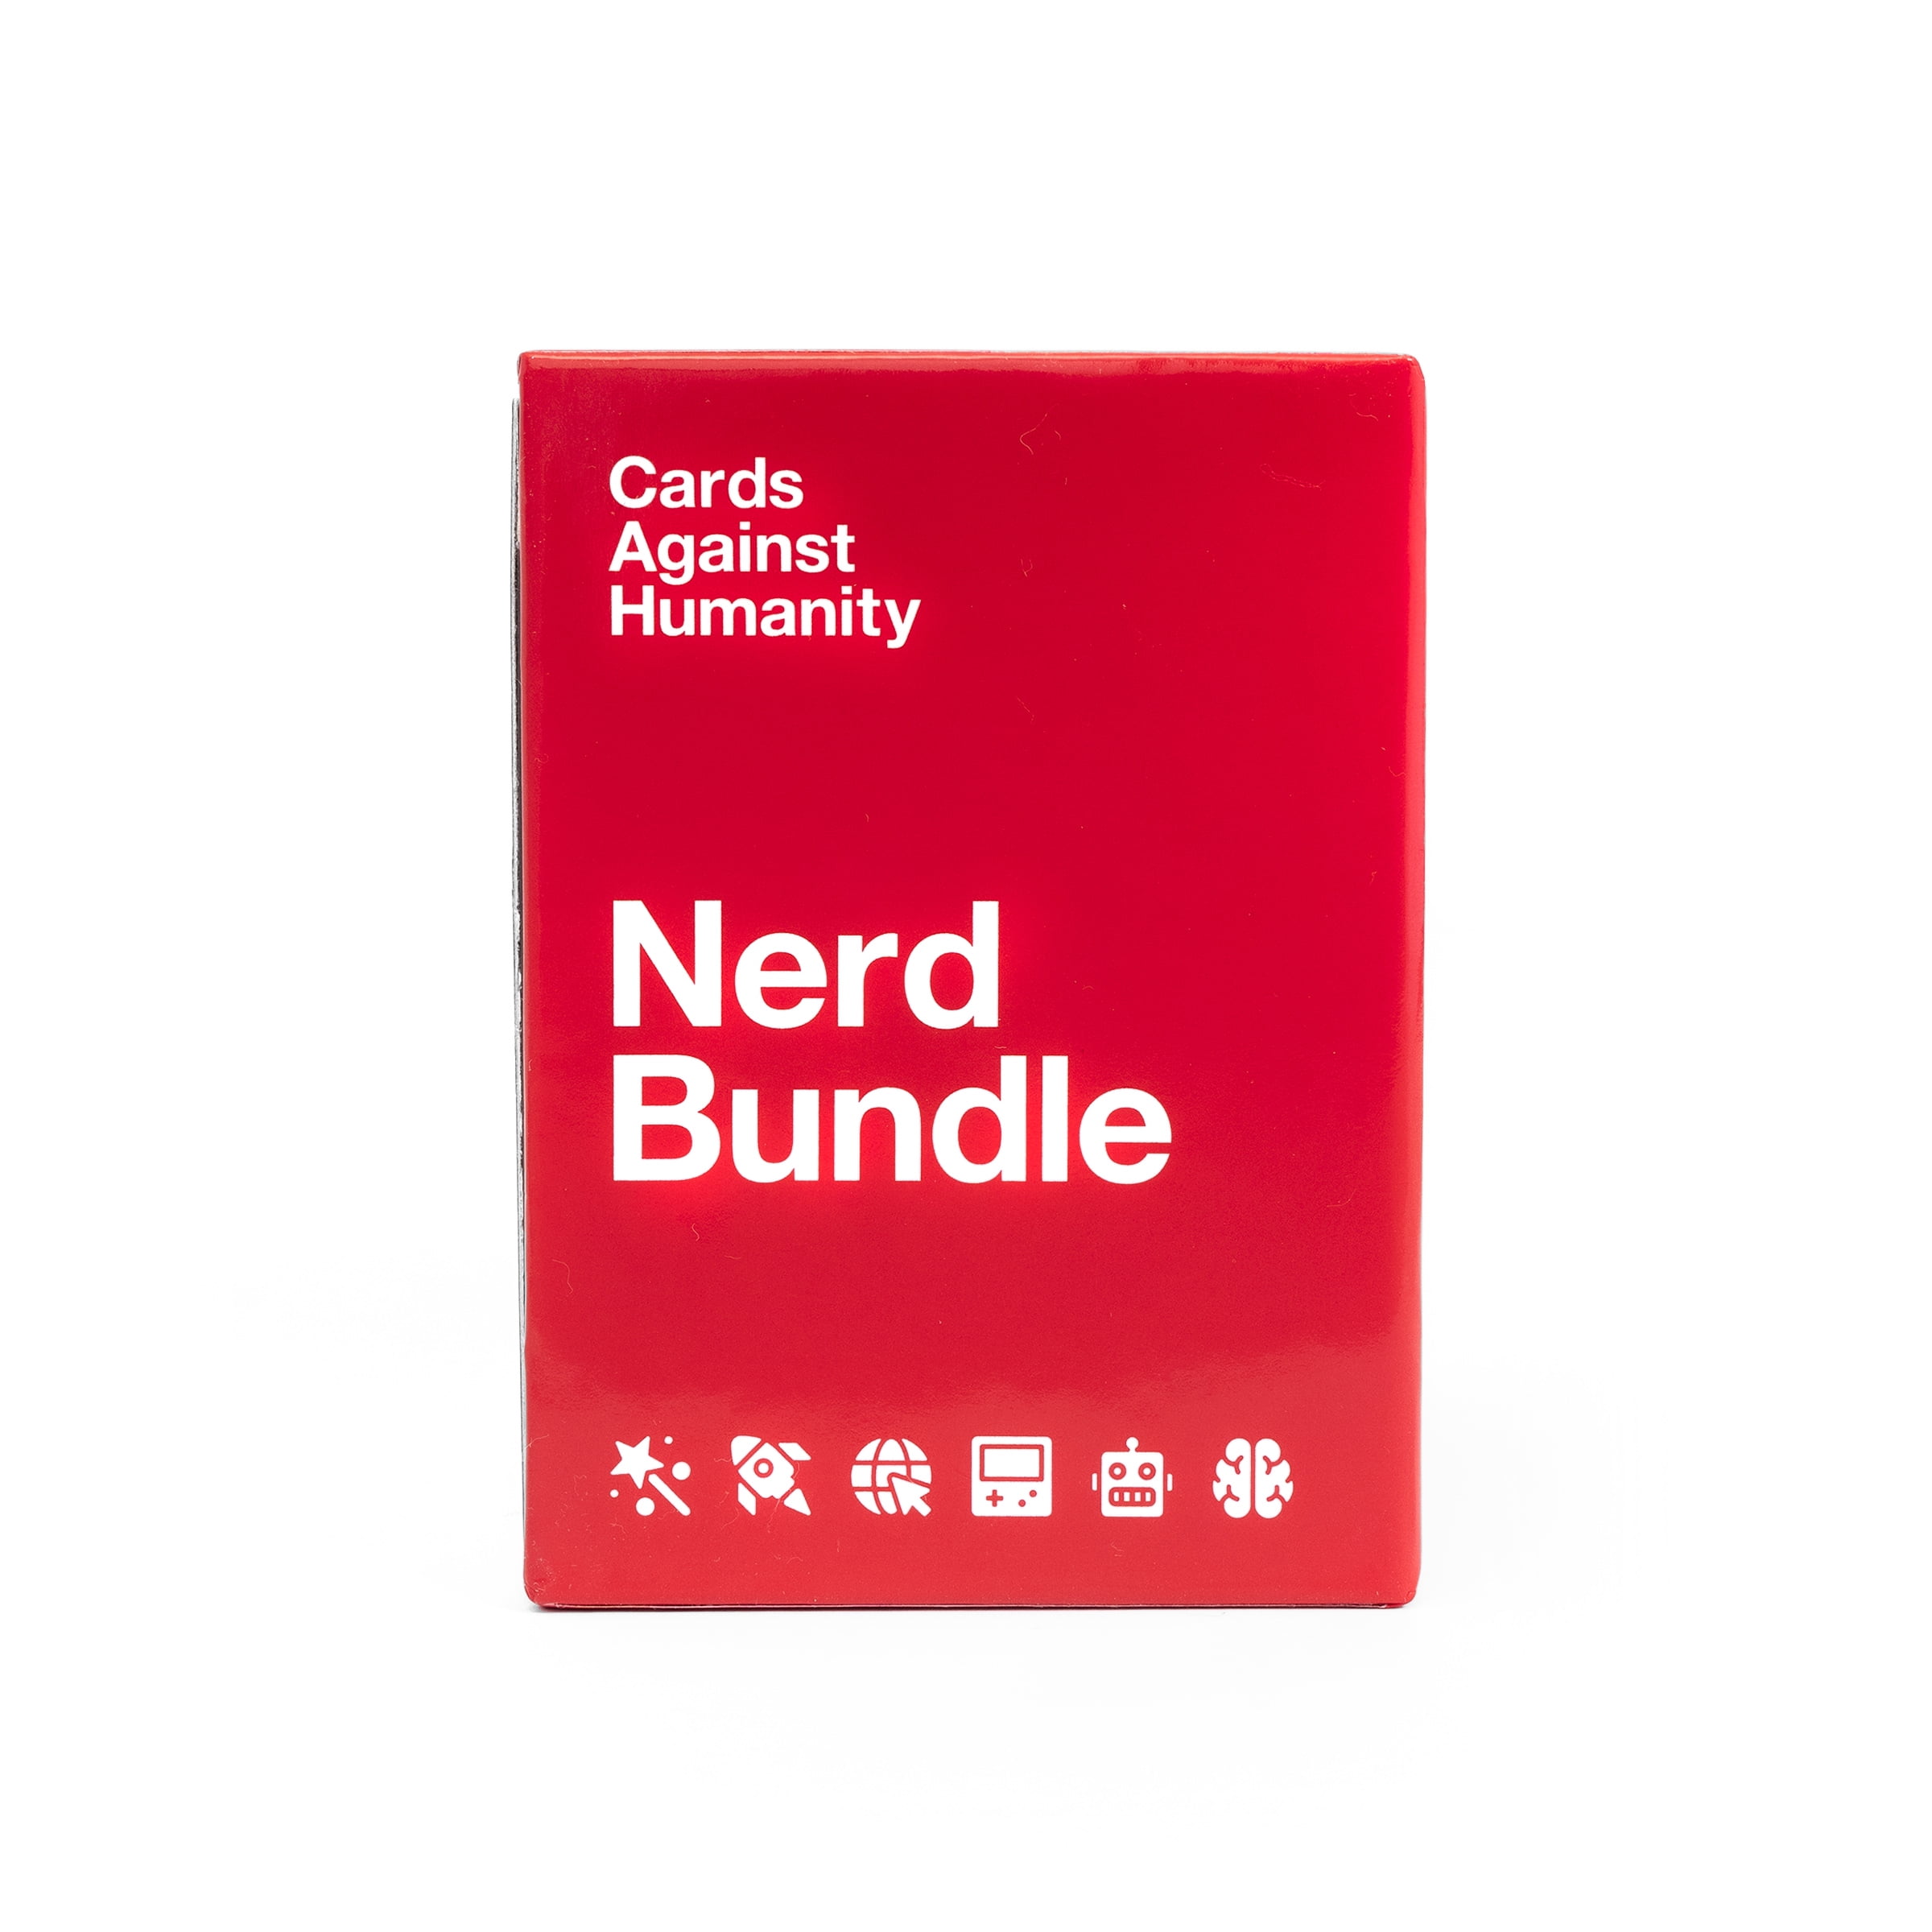 And Human Card Pack Expansion Pack Bundle Cards Against Humanity Cards Against Humanity A.I 